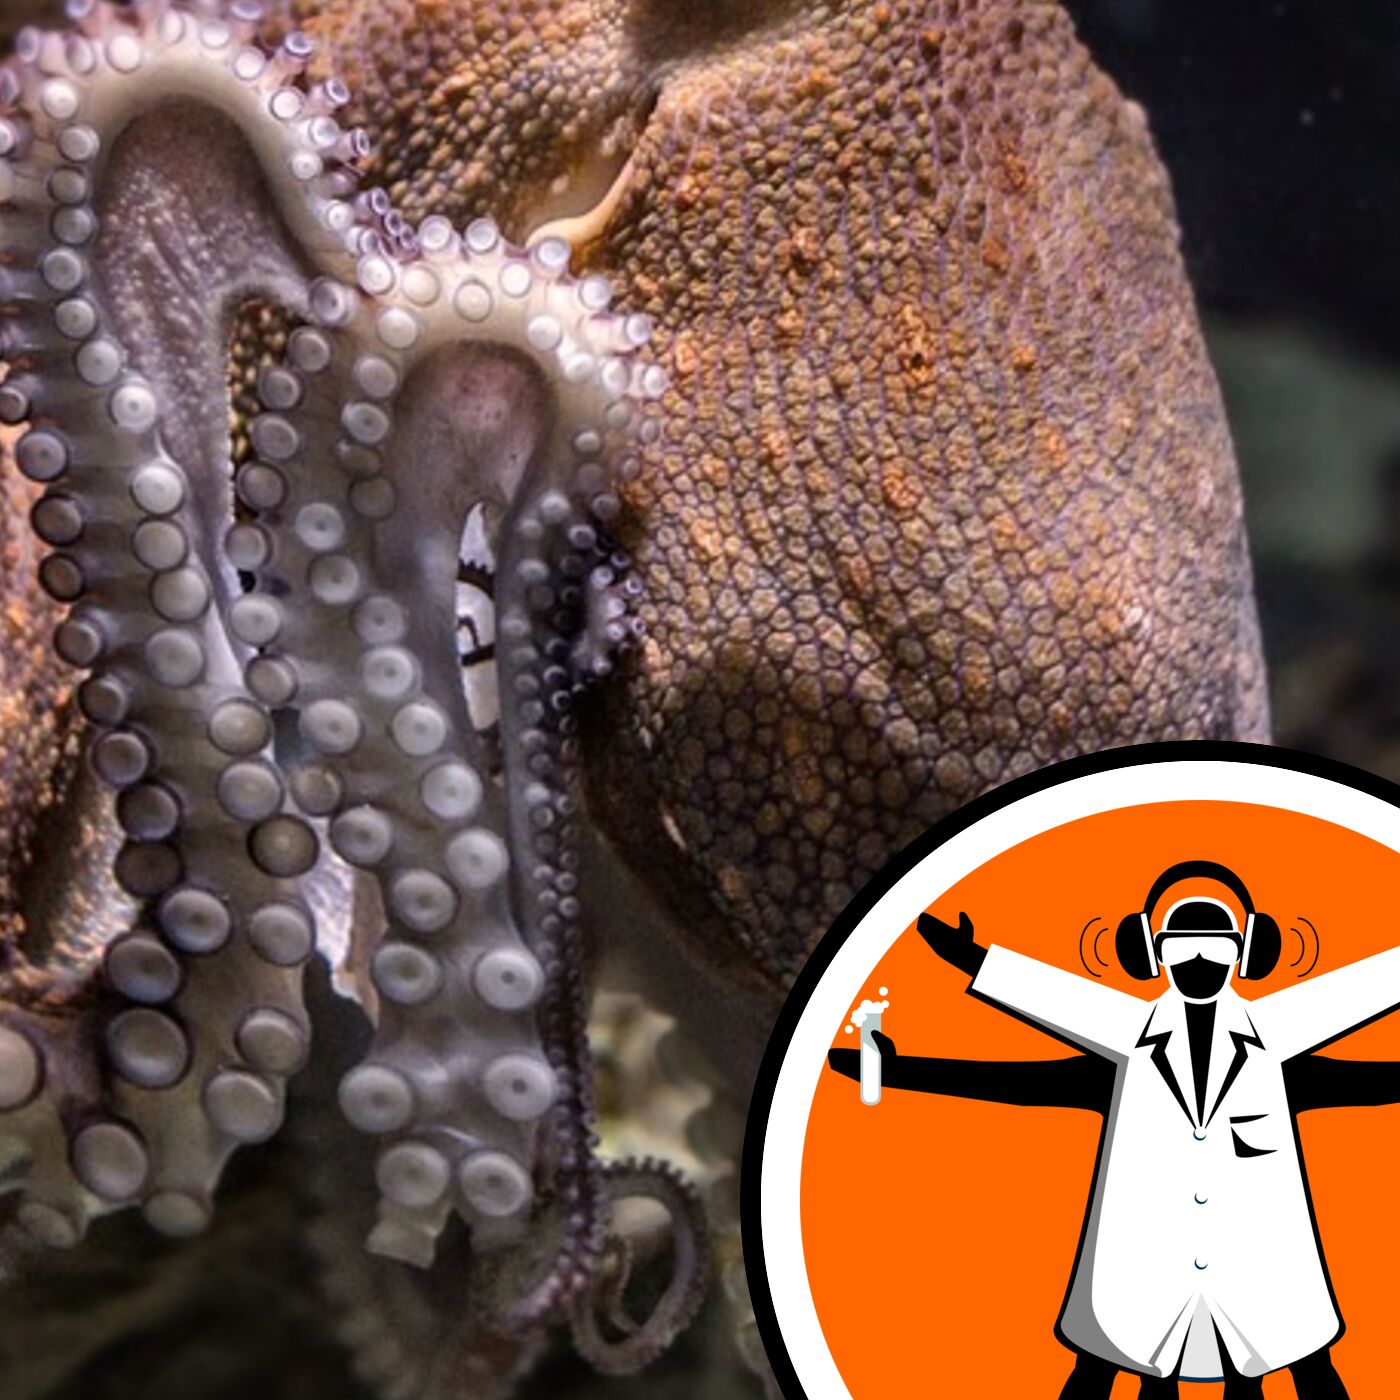 Octopuses taste with their tentacles